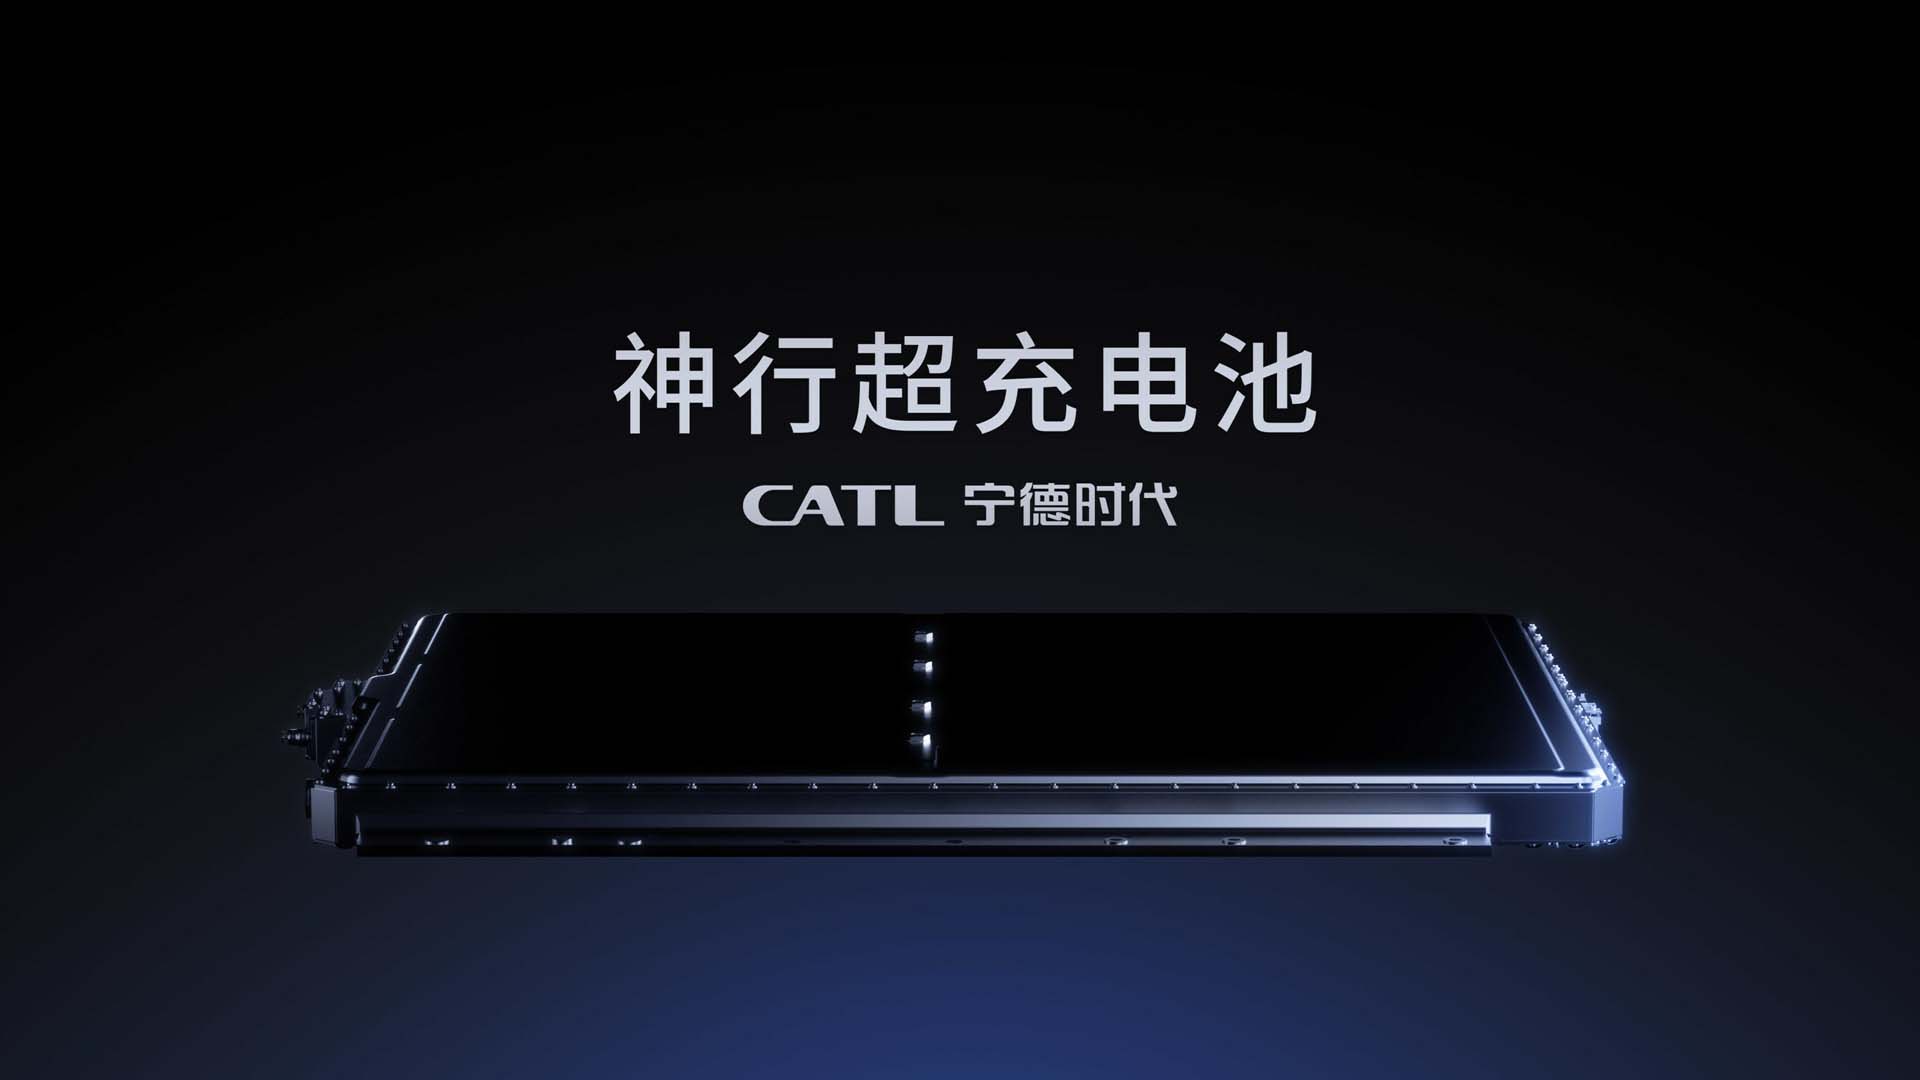 CATL Launches Superfast Charging Battery Shenxing, Opens Up Era of EV Superfast Charging